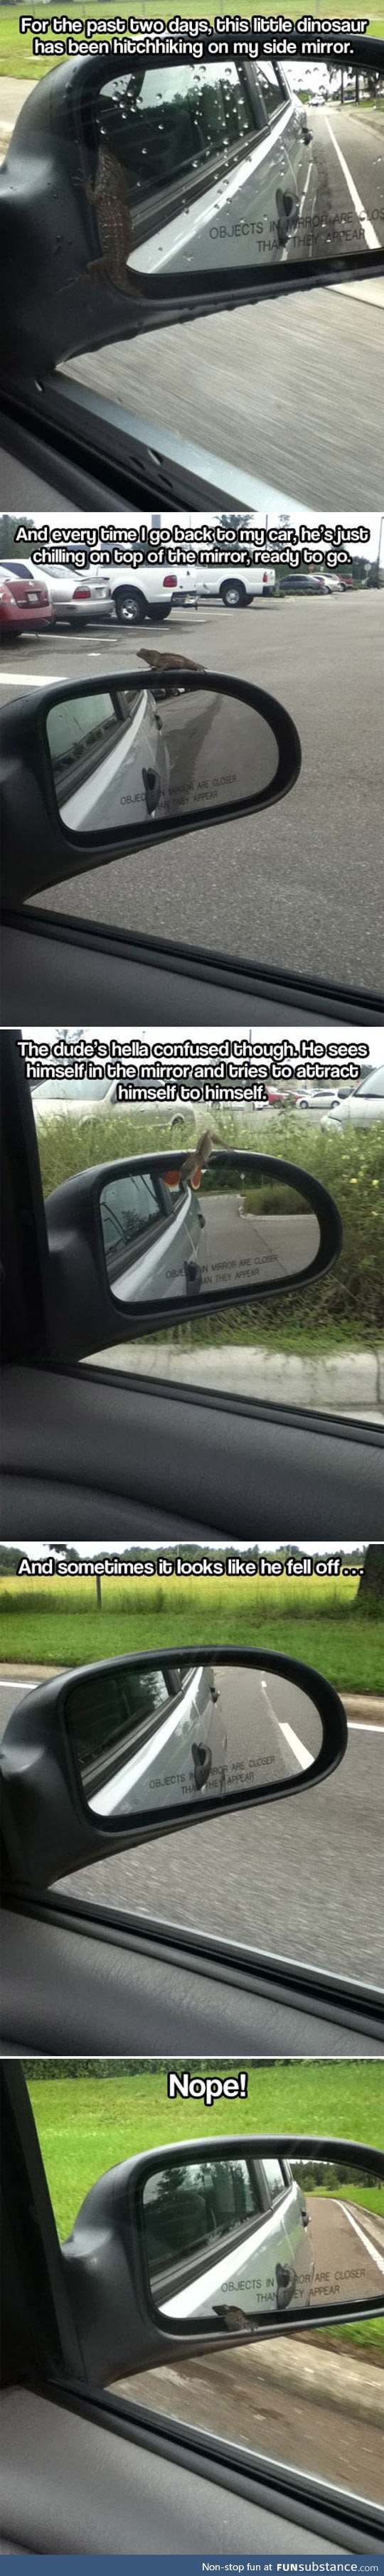 The Little Creature Living In My Car's Mirror